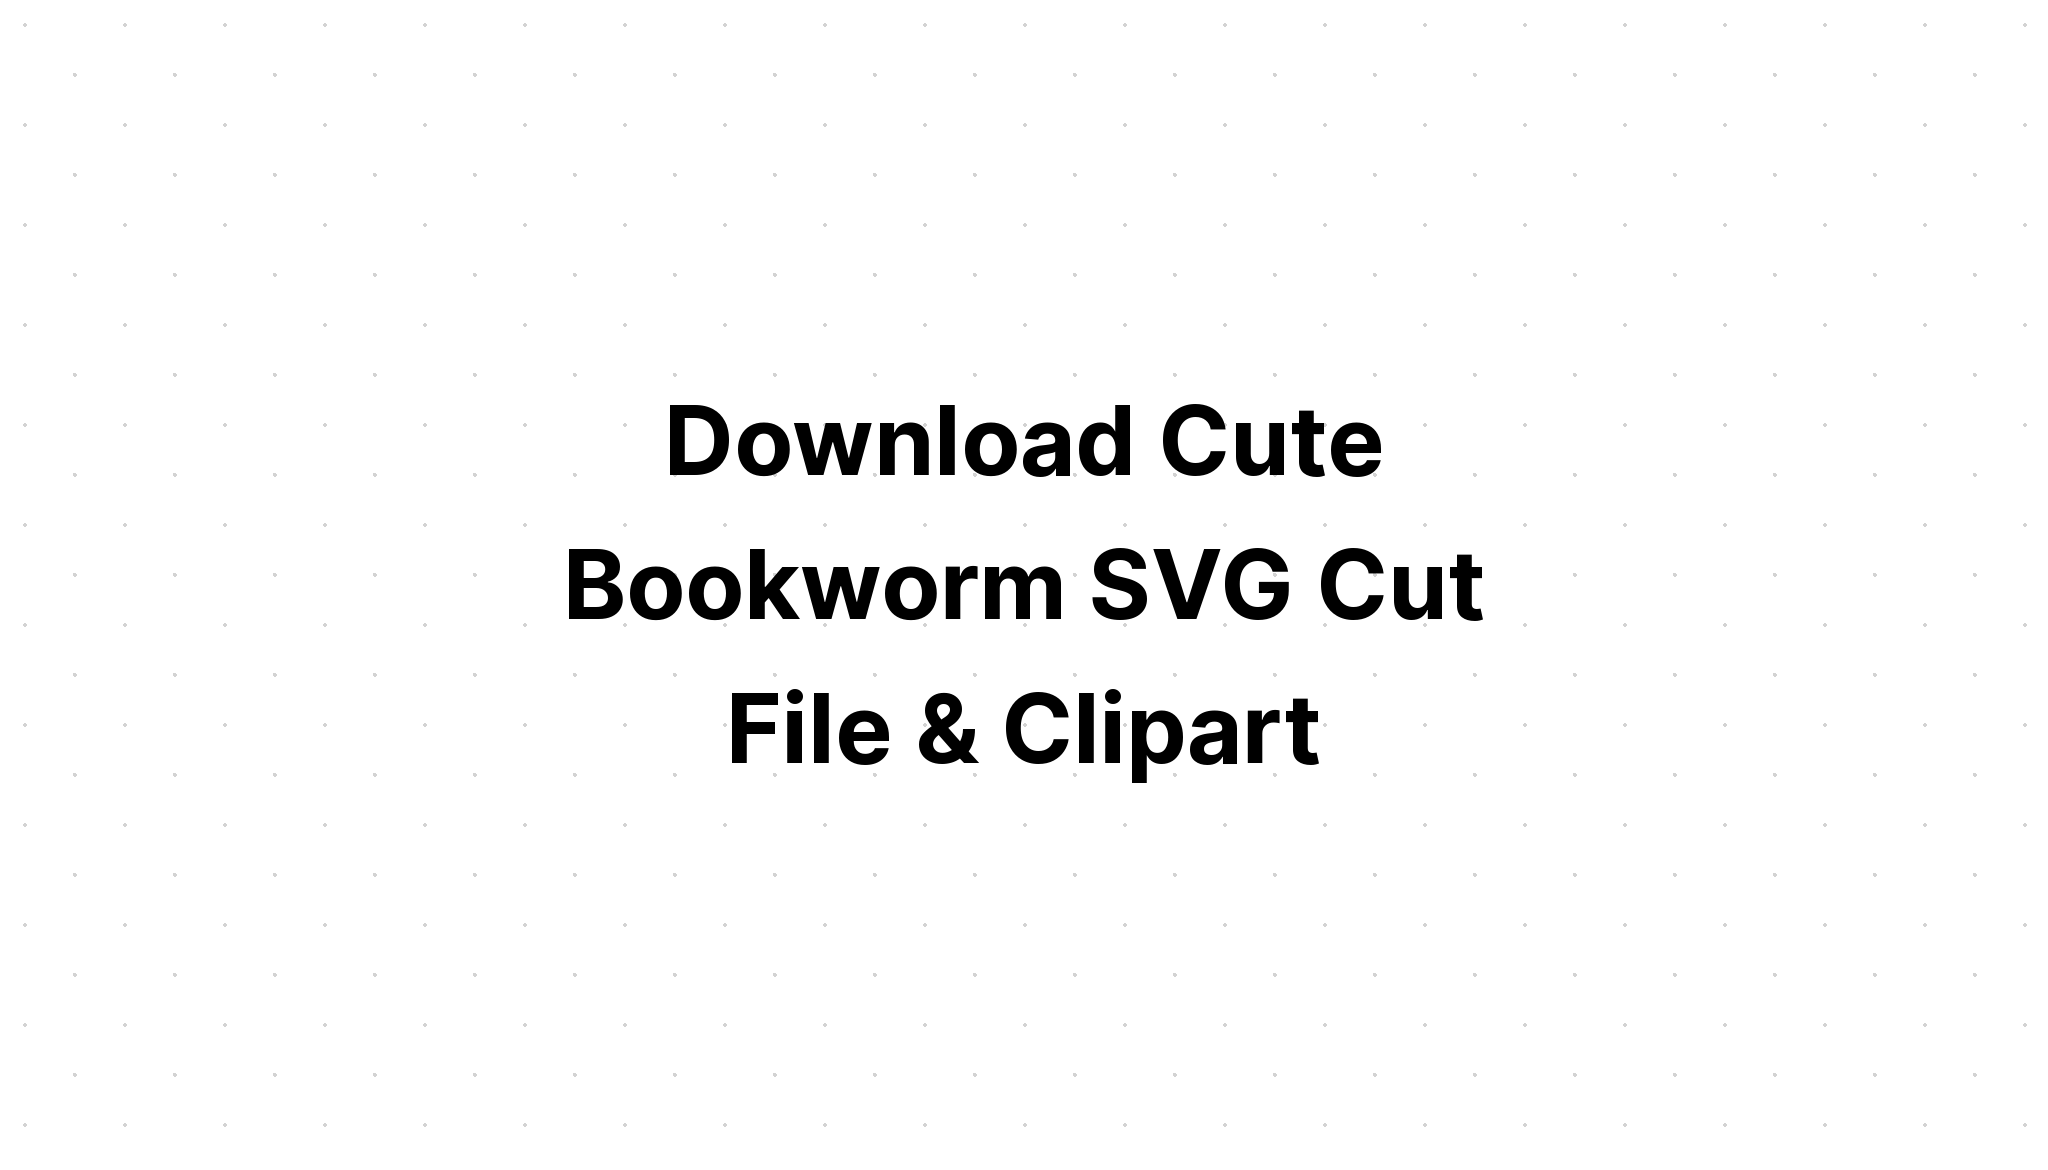 Download Cute Worm Svg - Layered SVG Cut File